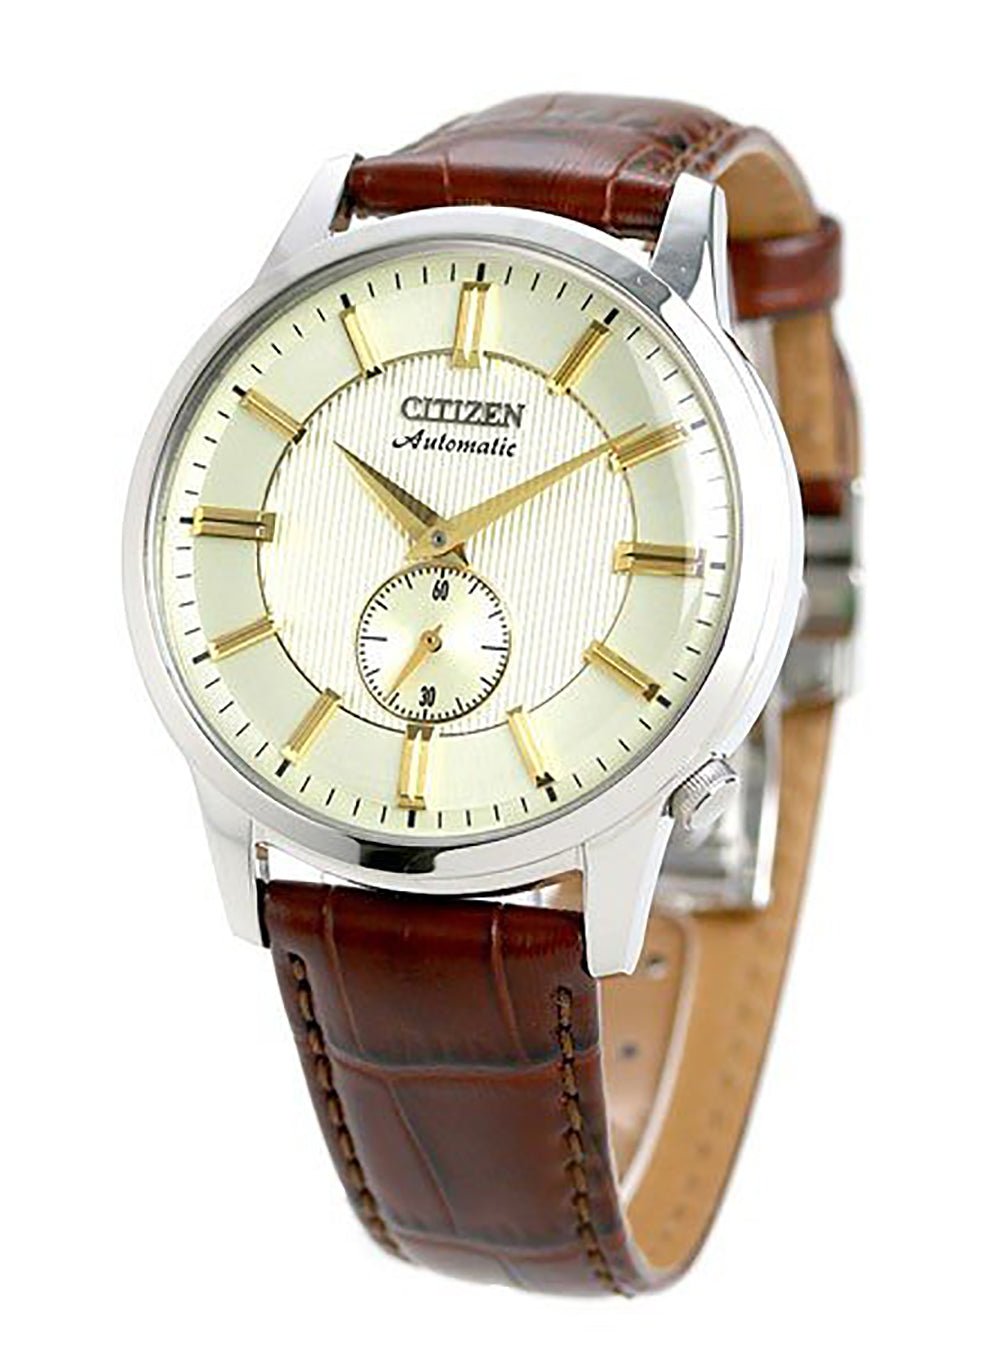 CITIZEN COLLECTION NK5000-12P MADE IN JAPAN JDM (Japanese Domestic Market)WRISTWATCHjapan-select